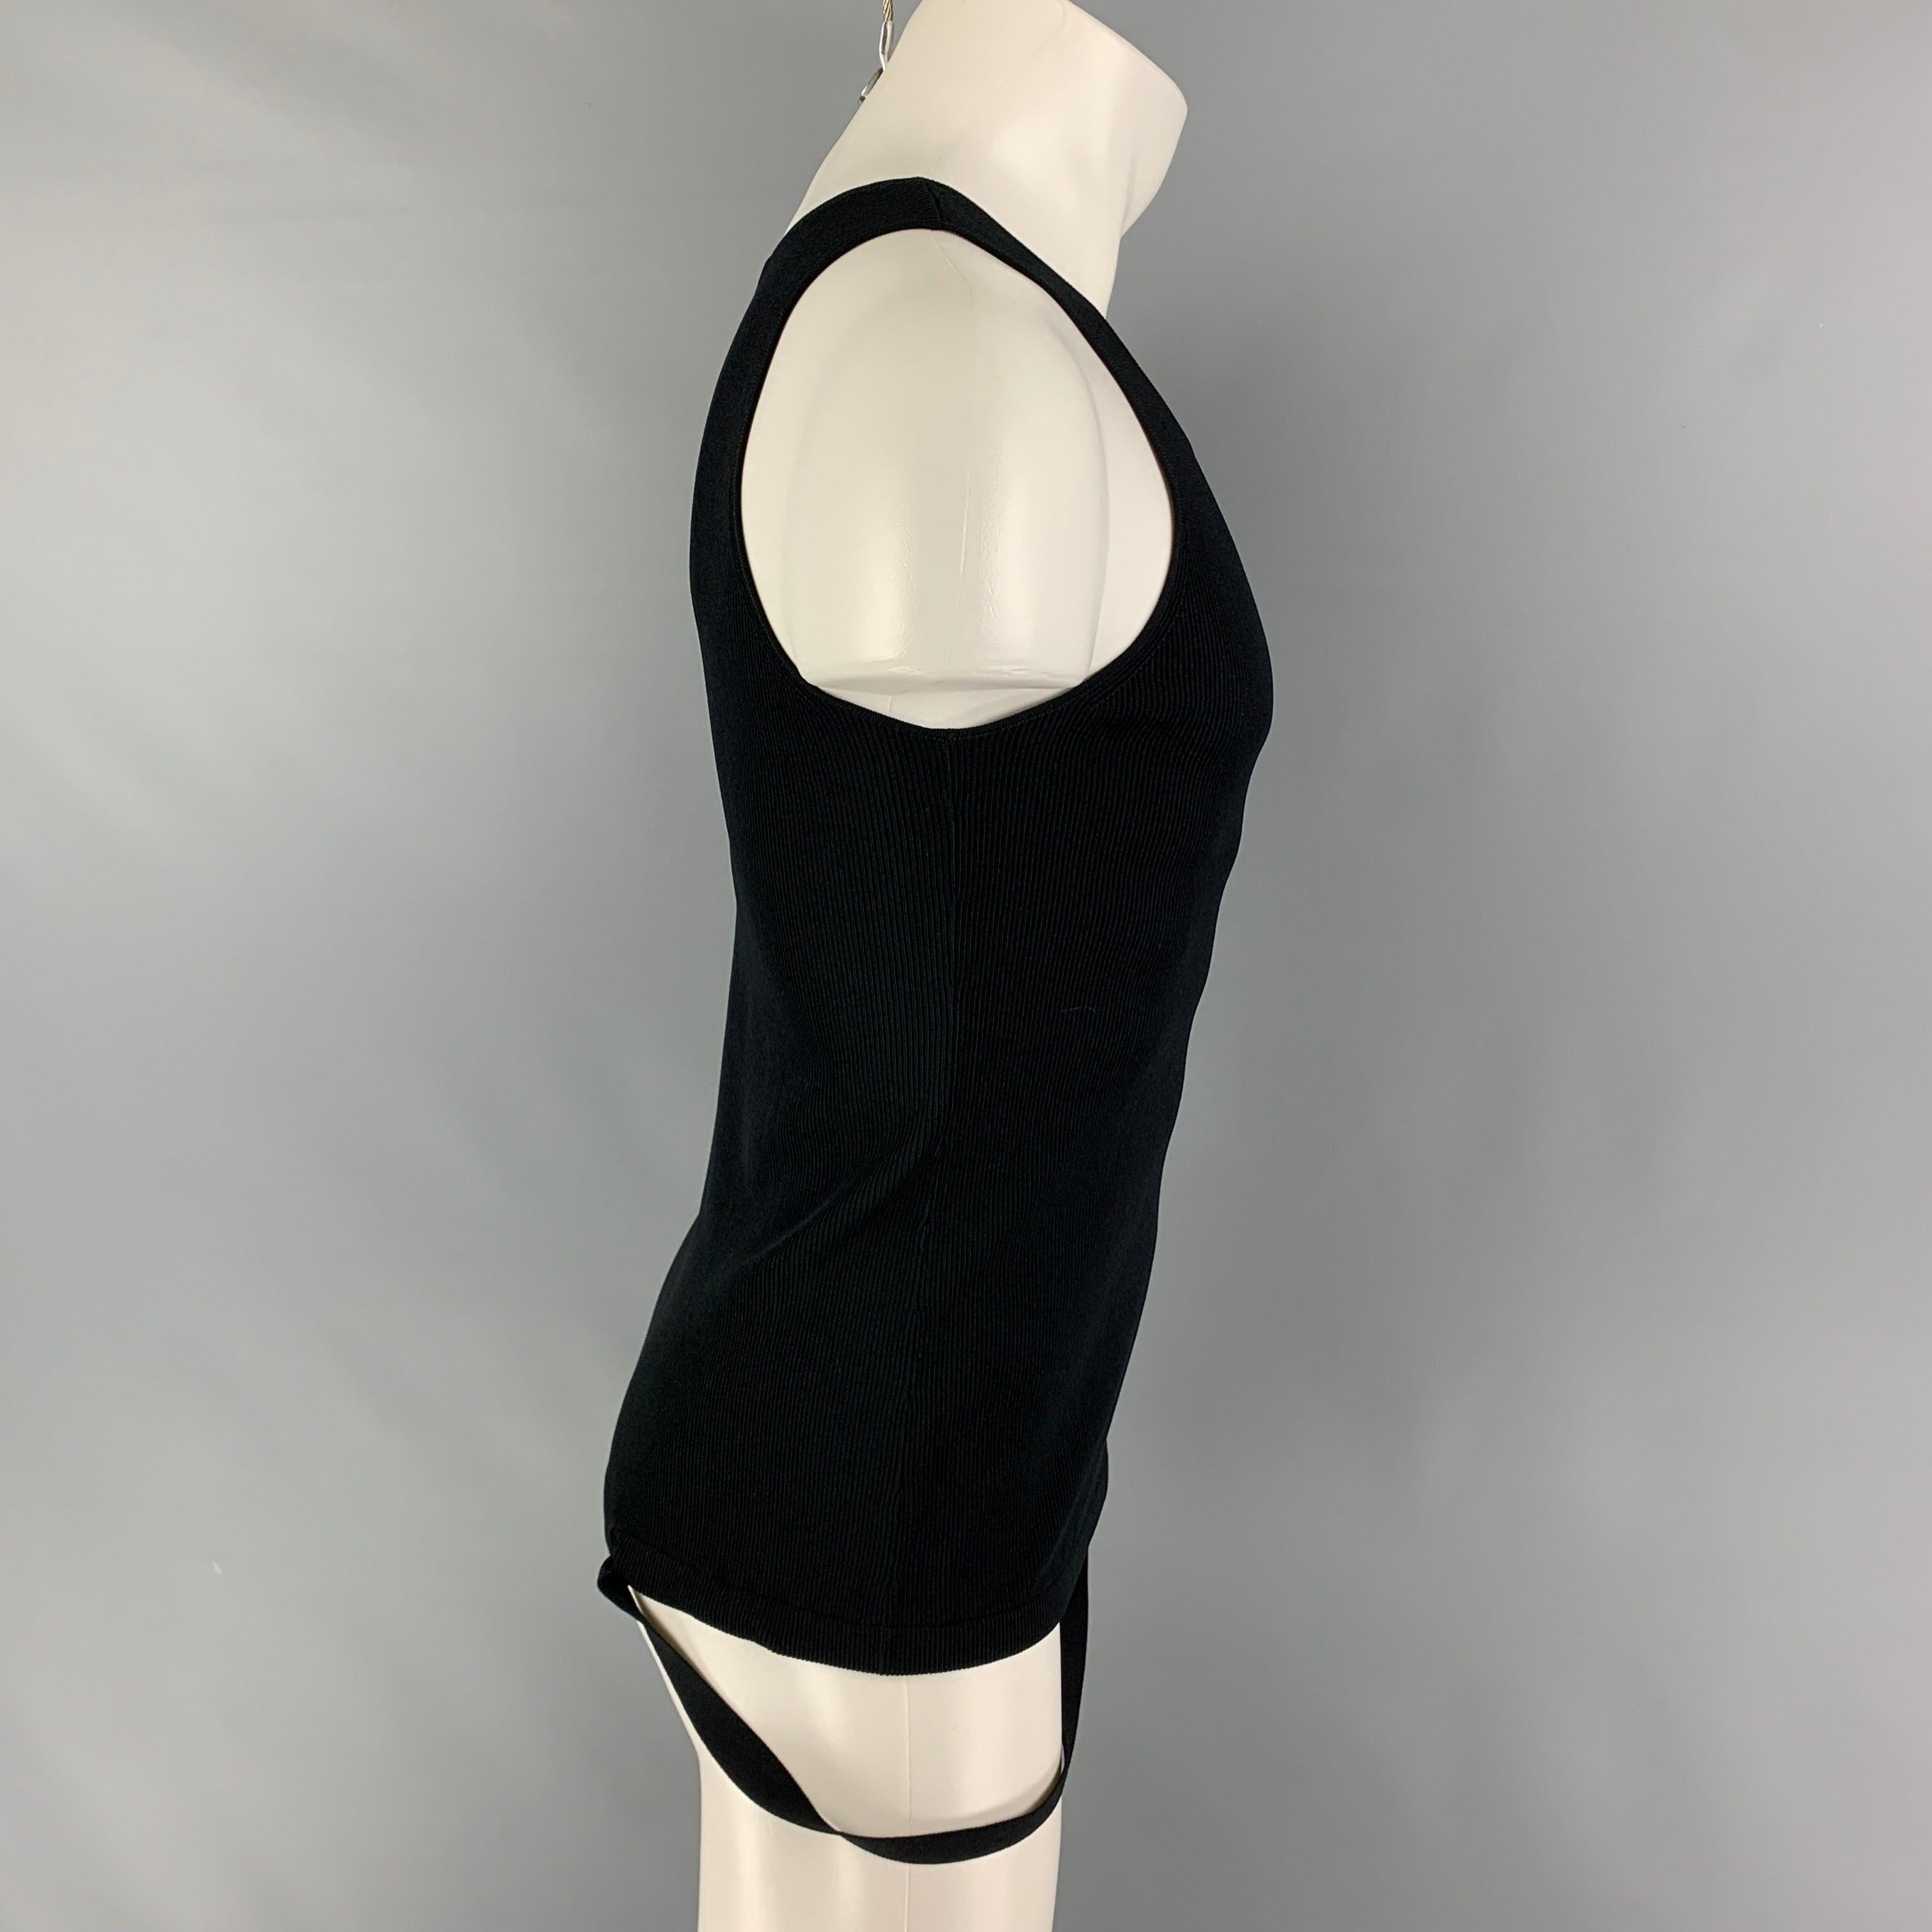 HELMUT LANG tank top comes in a black ribbed viscose blend featuring a parachute strap.
New With Tags.
 

Marked:   L  

Measurements: 
 
Shoulder: 11 inches  Chest: 31 inches  Length: 23 inches 
  
  
 
Reference: 117068
Category: Tank Top
More